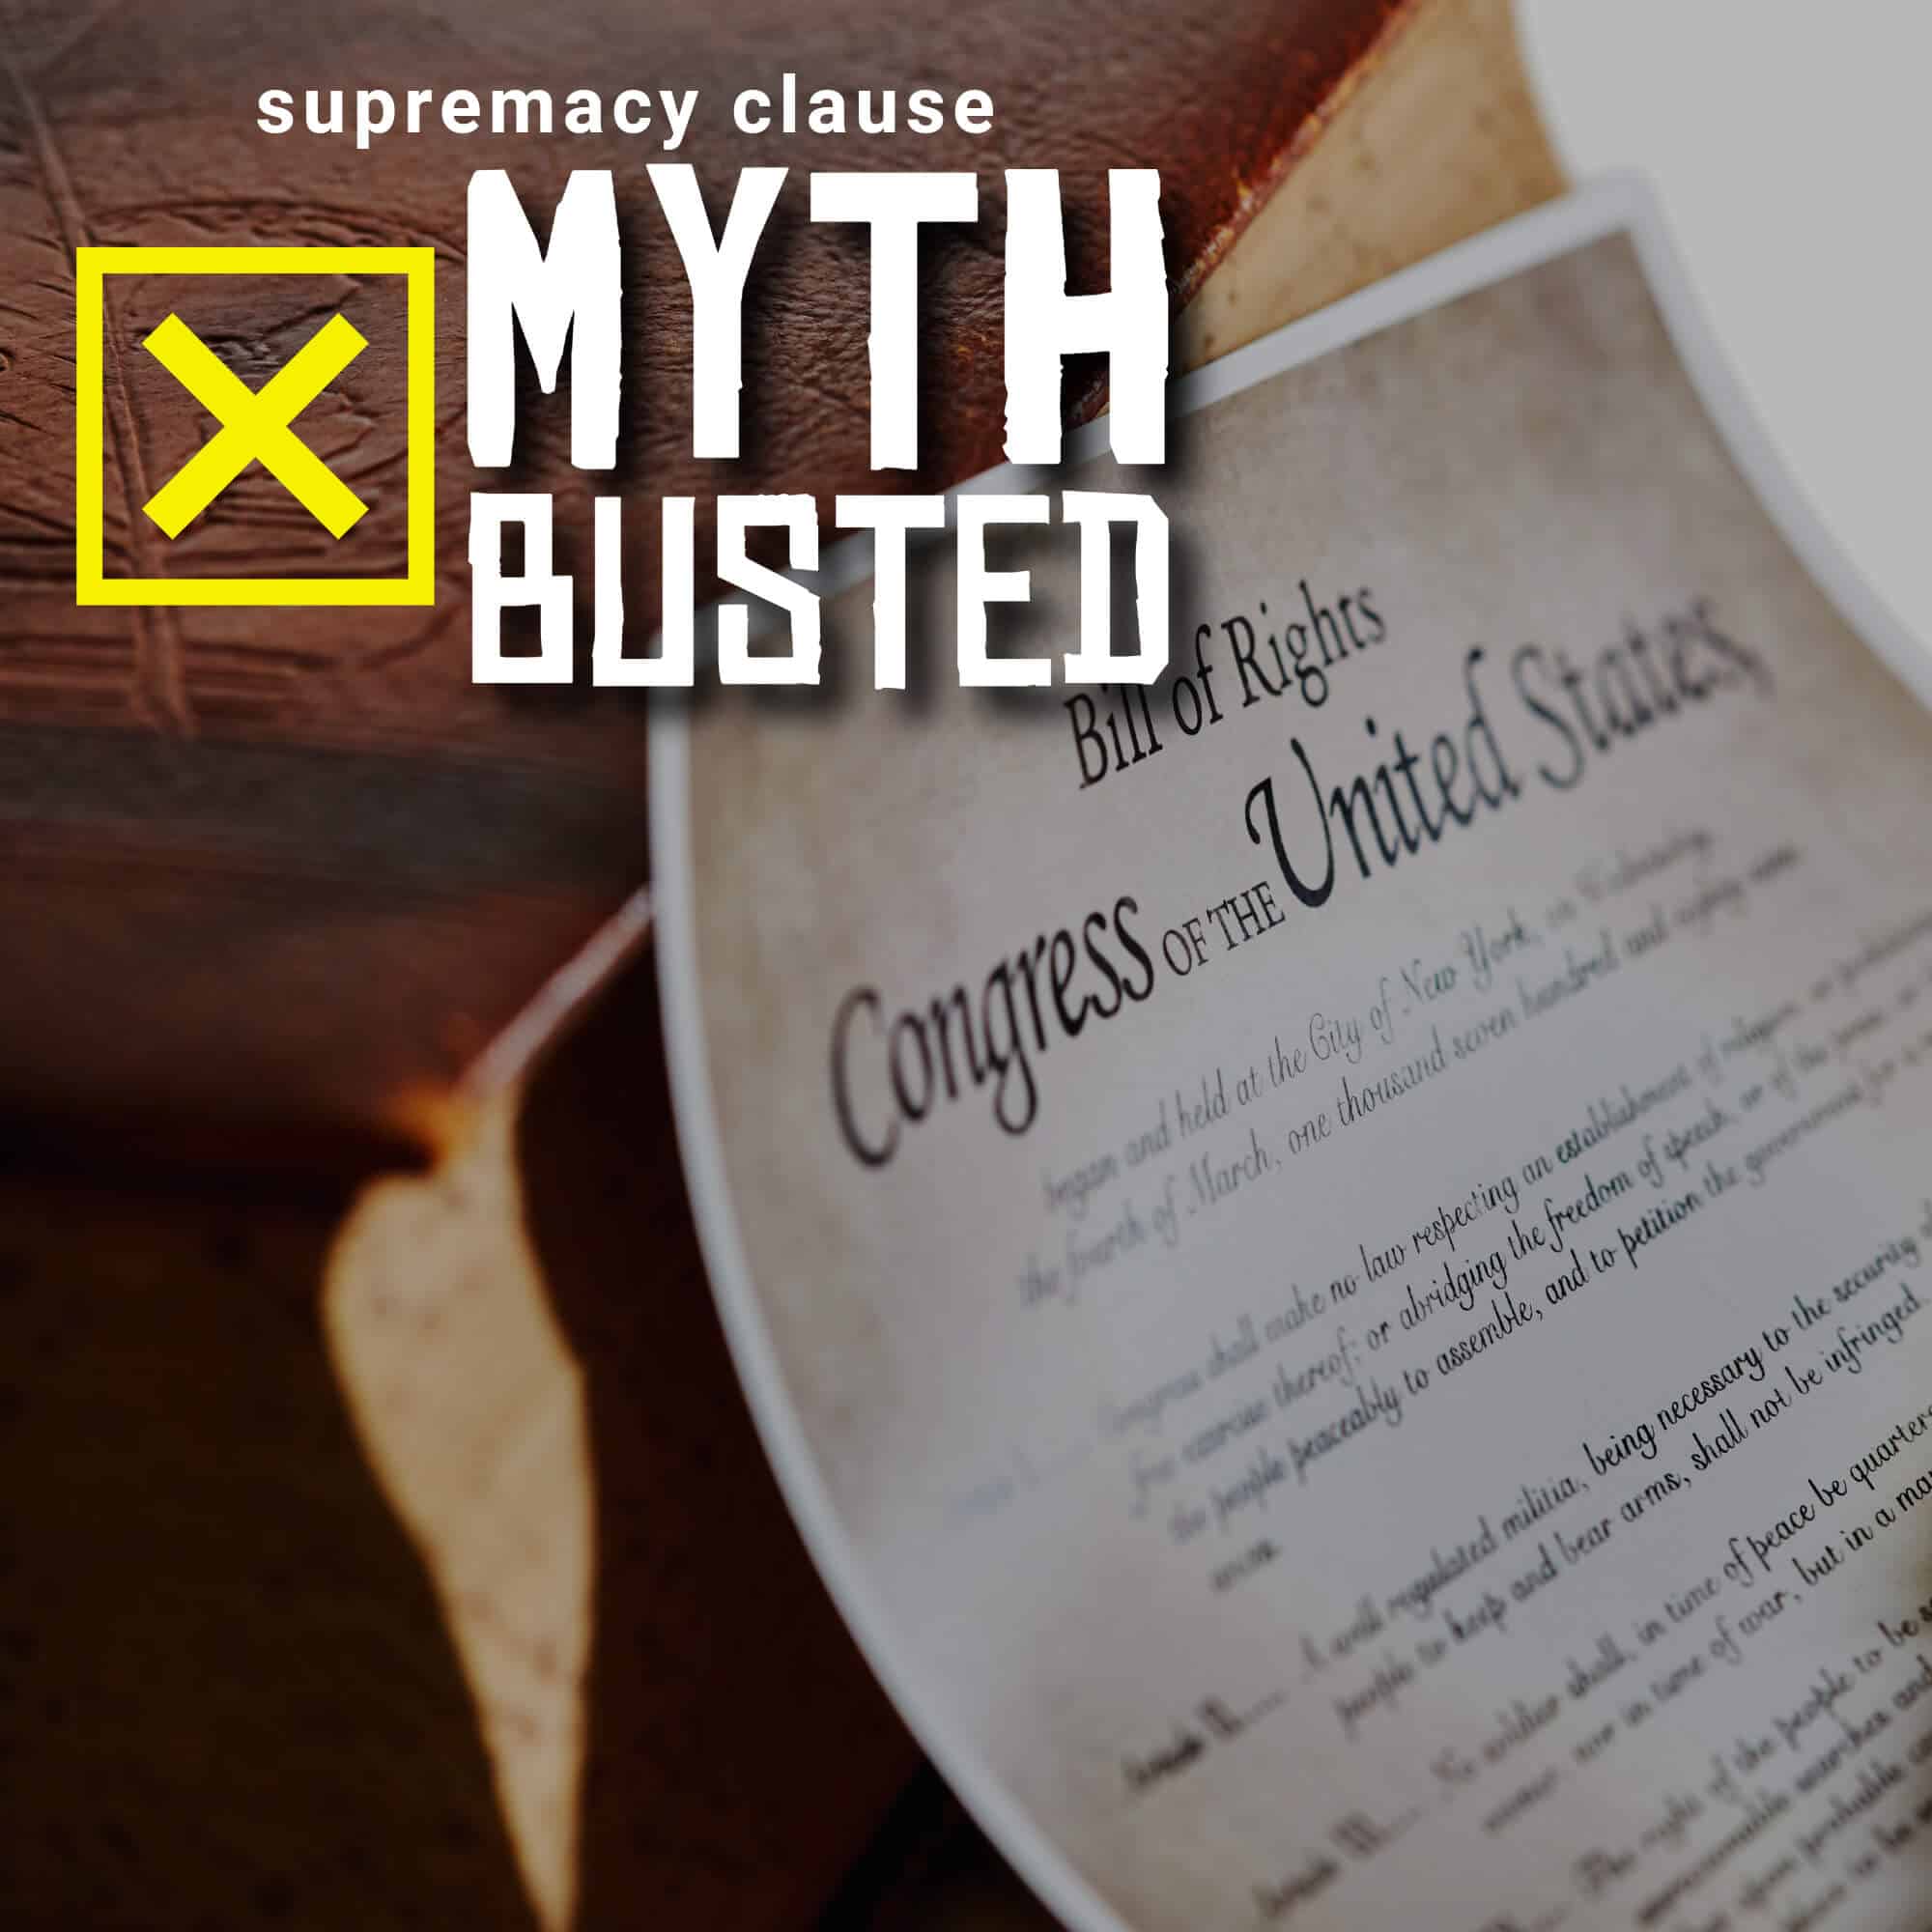 10th Amendment: Why the Supremacy Clause Doesn’t Apply When States Opt Out